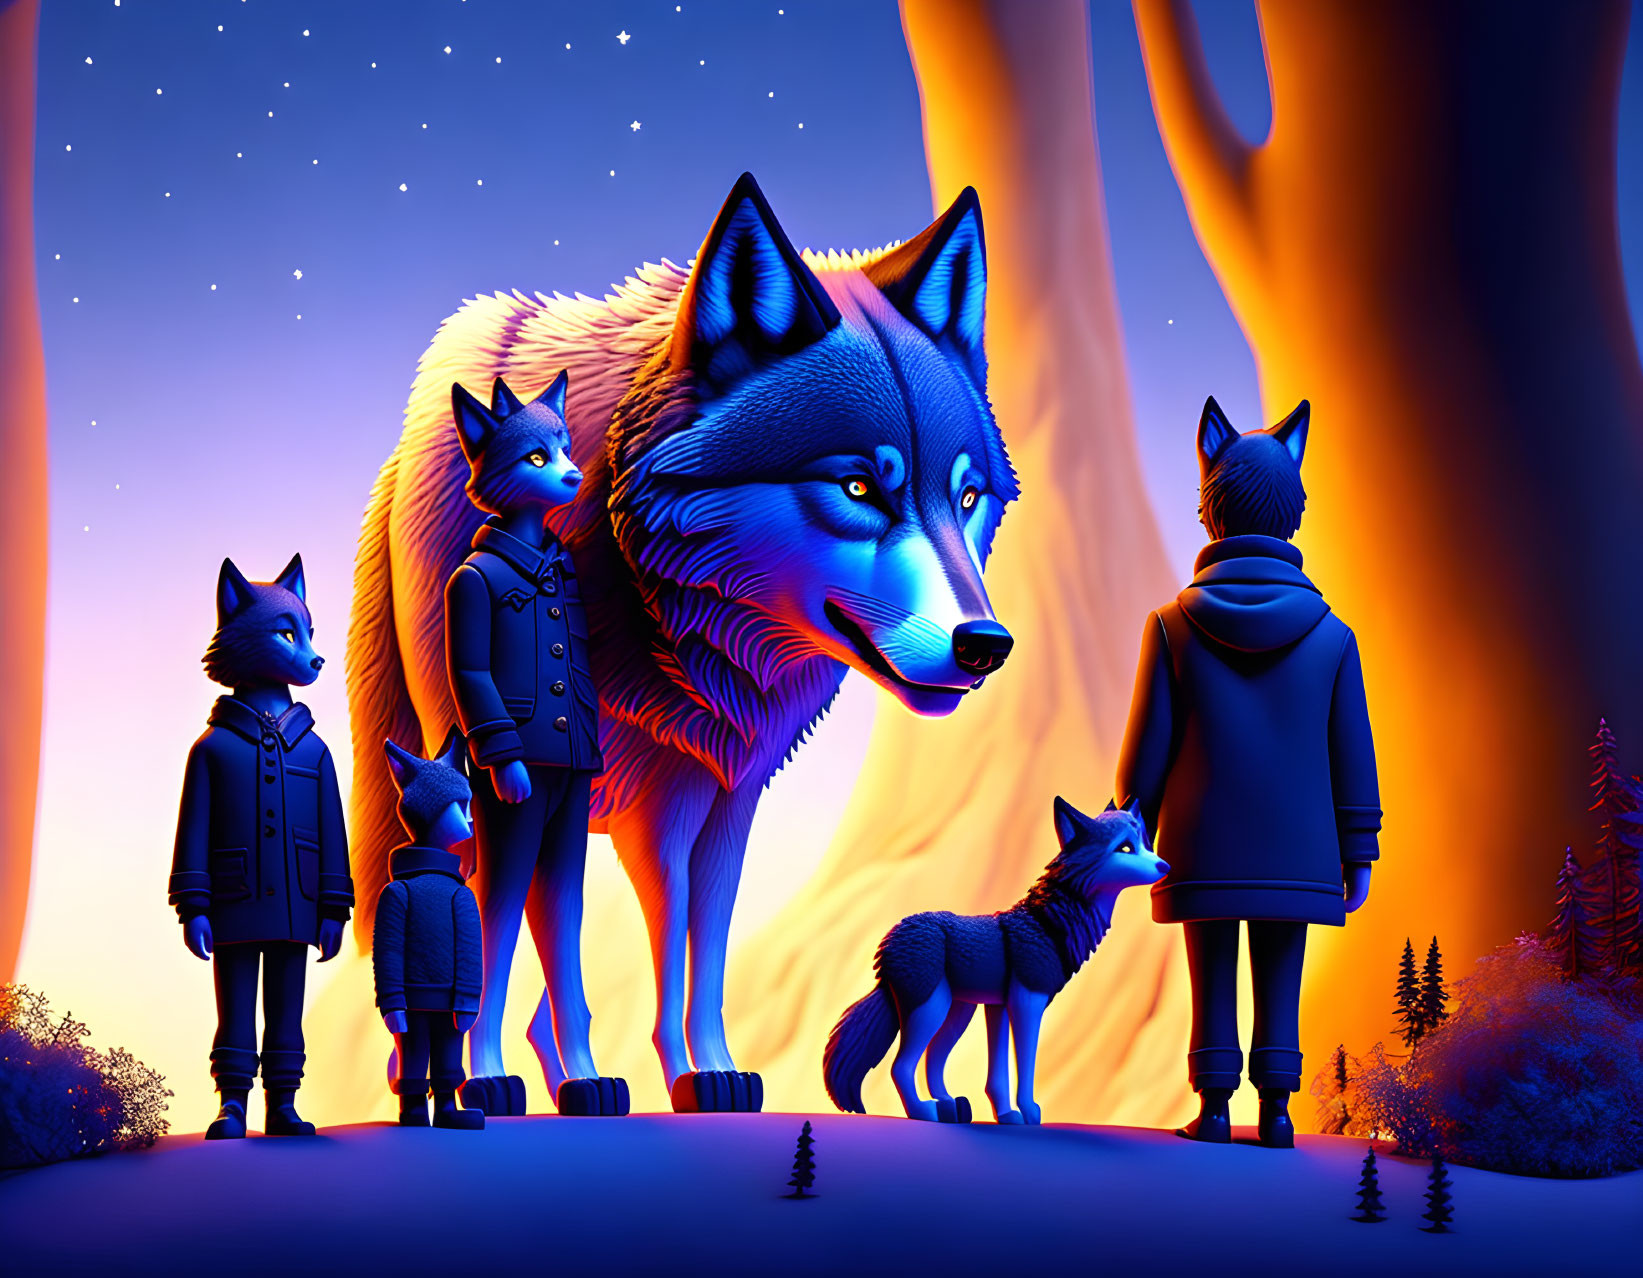 Anthropomorphic wolves in mystical forest under starry sky